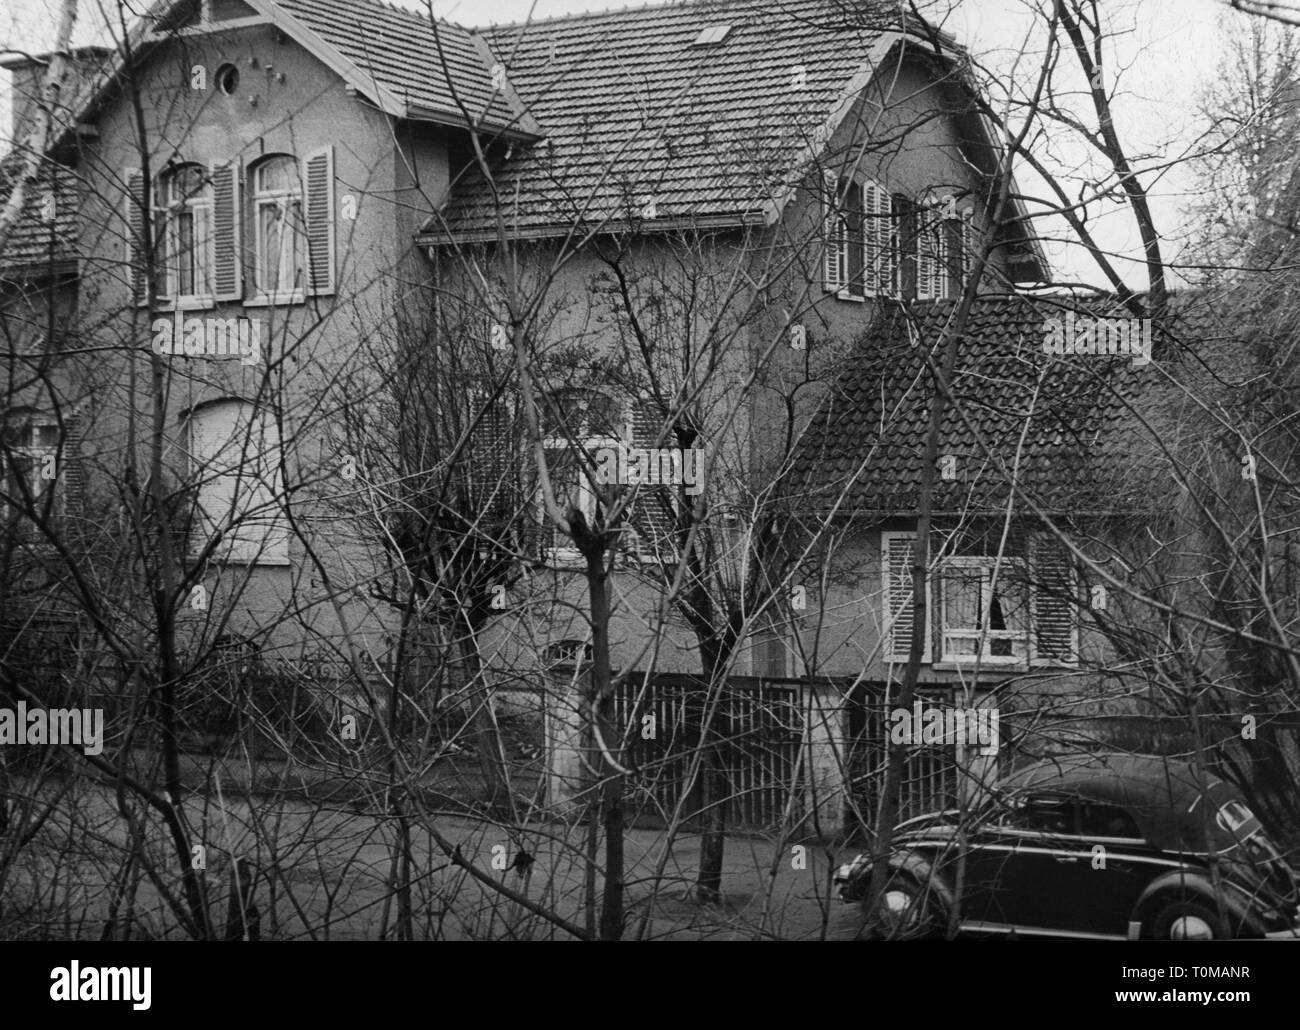 geography / travel, Germany, Brunswick, building, mansion in Stresemannstrasse 5, accommodation of the Duchess Victoria Louise of Brunswick 1956 - 1980, exterior view, 4.12.1956, House of Hohenzollern, Princess of Prussia, House of Hanover, Welf dynasty, Welfs, West Germany, Western Germany, aristocracy, aristocracies, high nobility, Riddagshausen, house, houses, Lower Saxony, Central Europe, 1950s, 50s, 20th century, building, buildings, villa, mansion, villas, mansions, historic, historical, Viktoria Luise, Additional-Rights-Clearance-Info-Not-Available Stock Photo